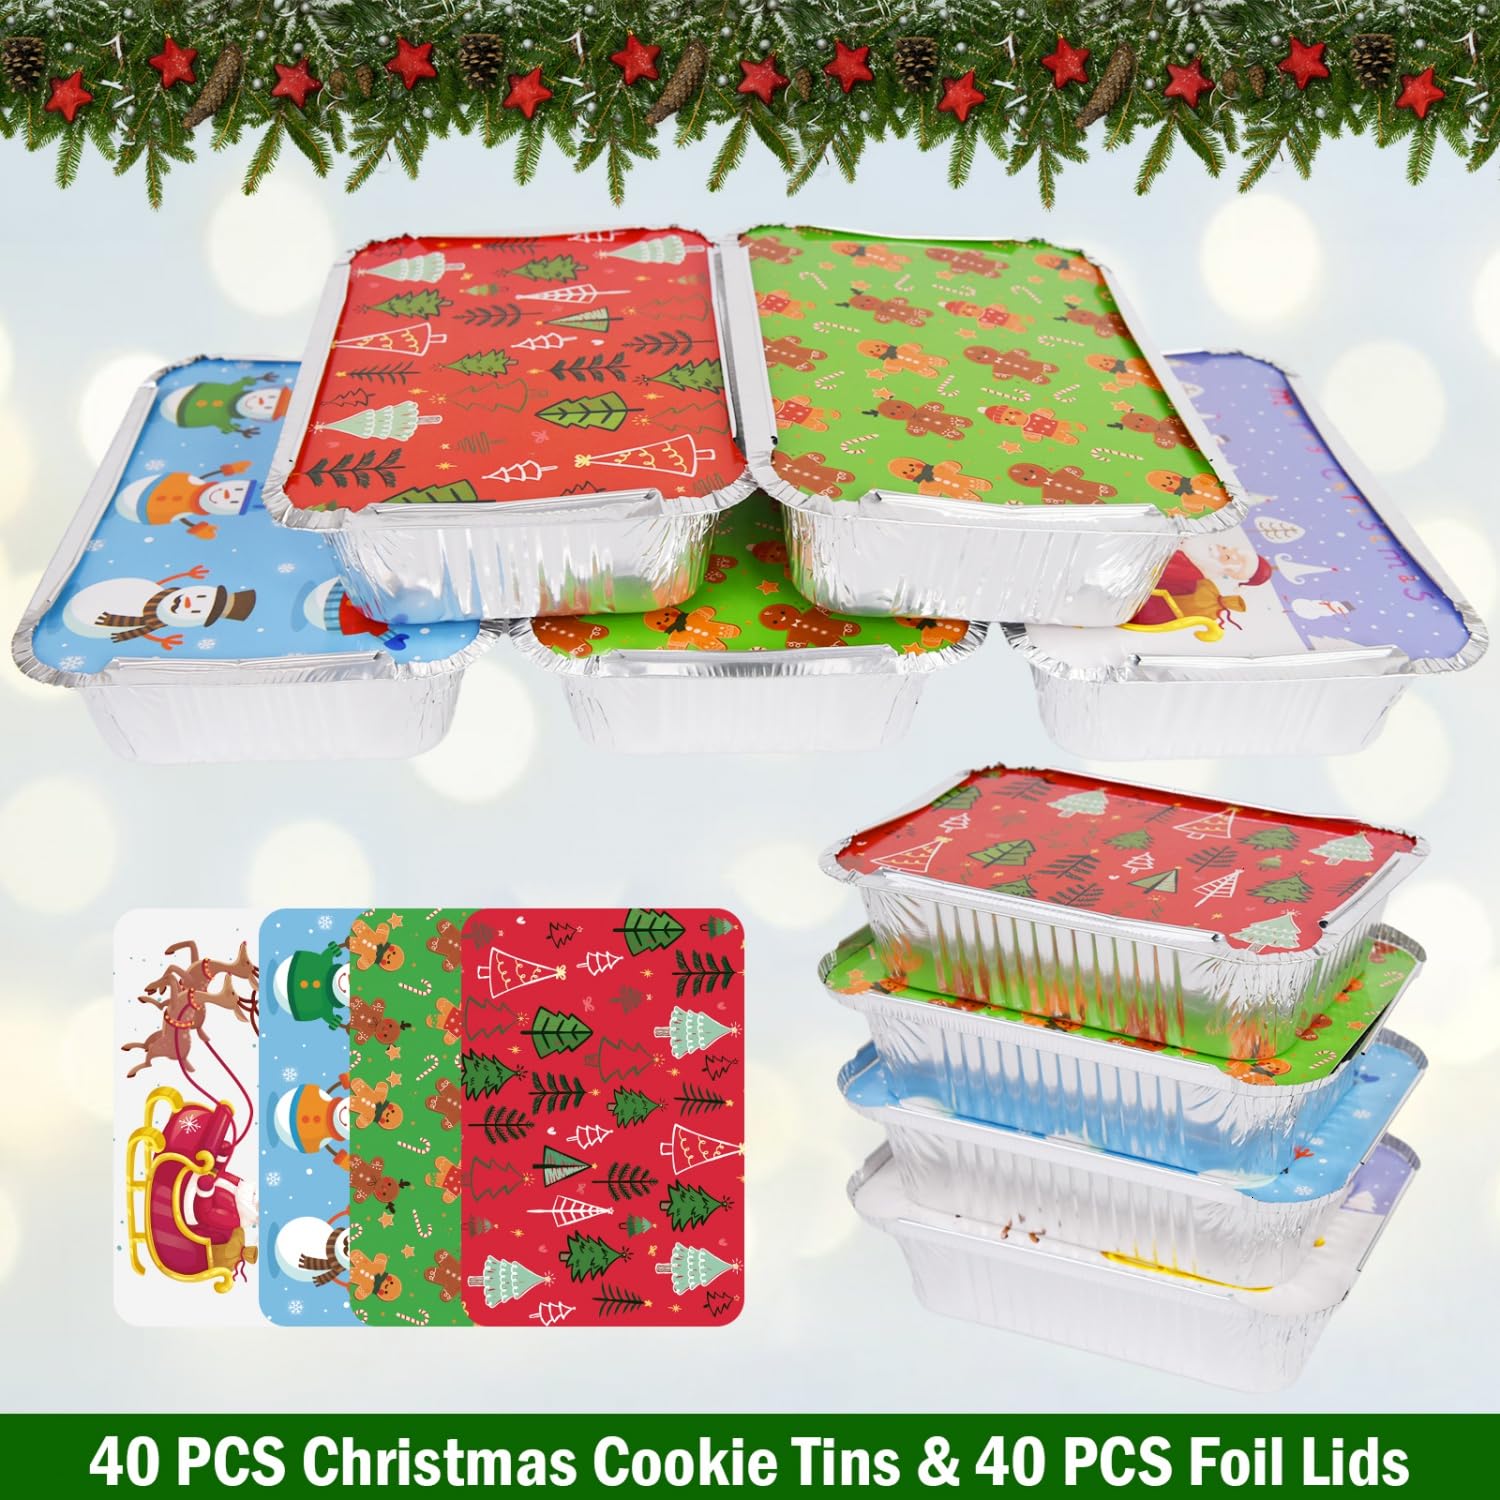 Rocinha 40 PCS Christmas Cookie Tins with Lids for Gift Giving, 4 Holiday Designs Christmas Tins Christmas Food Containers for Cookies Candy Treat Exchange 7.3"x 5.2" x 2"Christmas Foil Pans with Lids